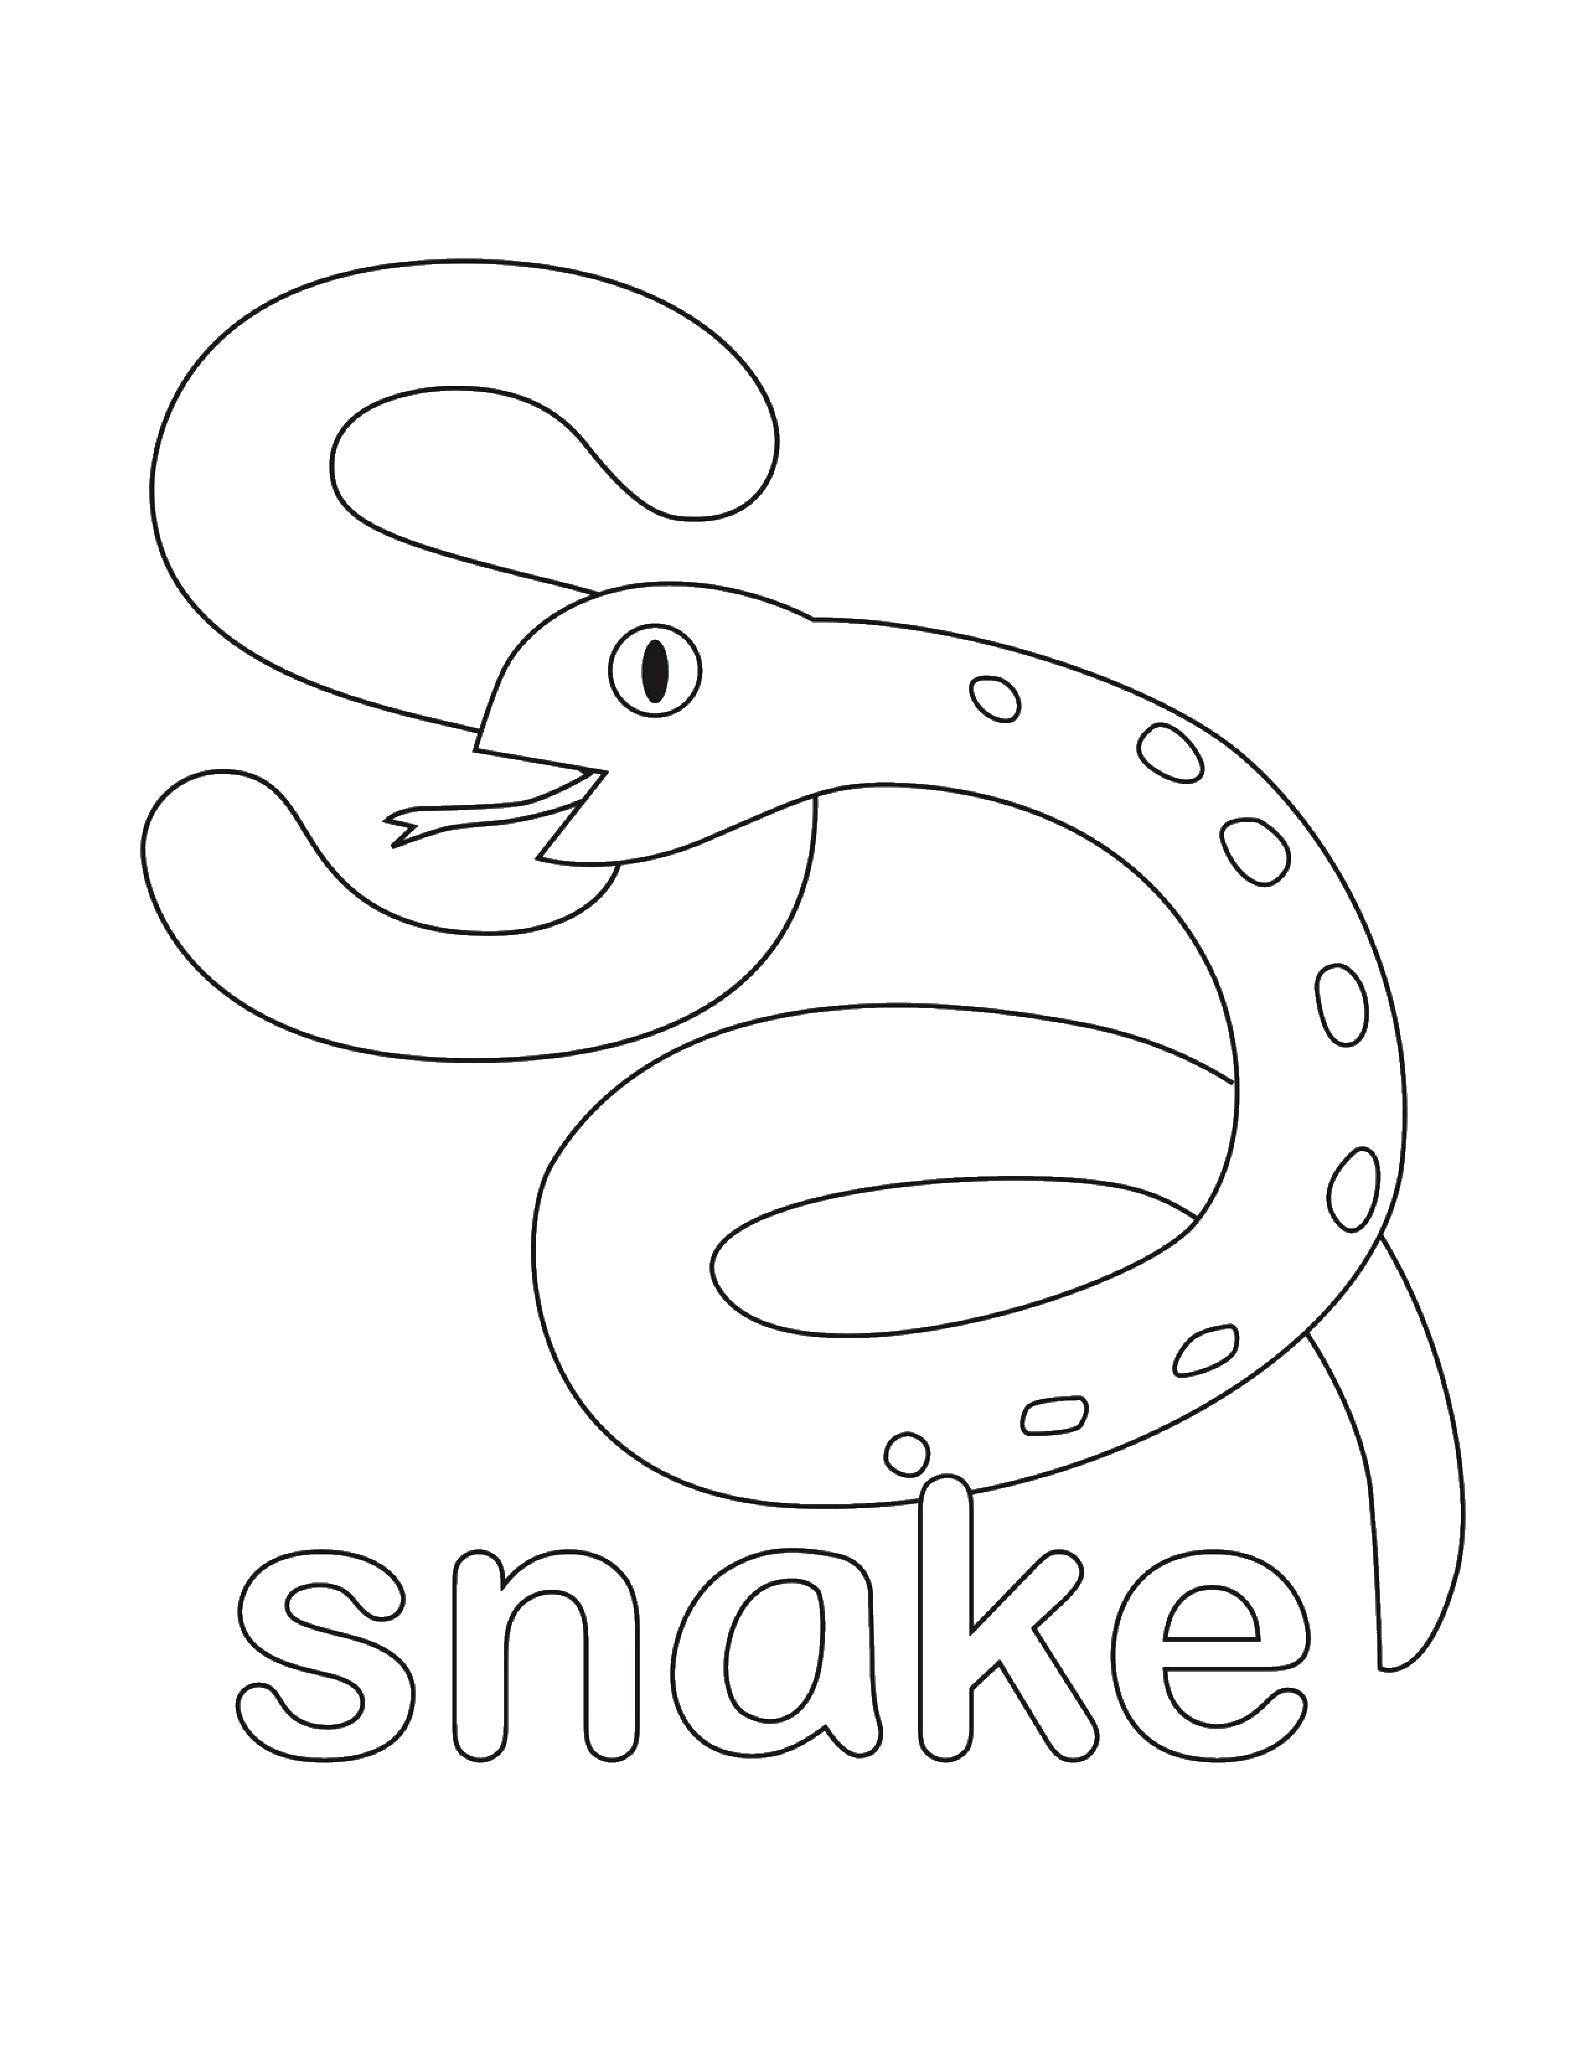 Coloring Z snake. Category English words. Tags:  English.